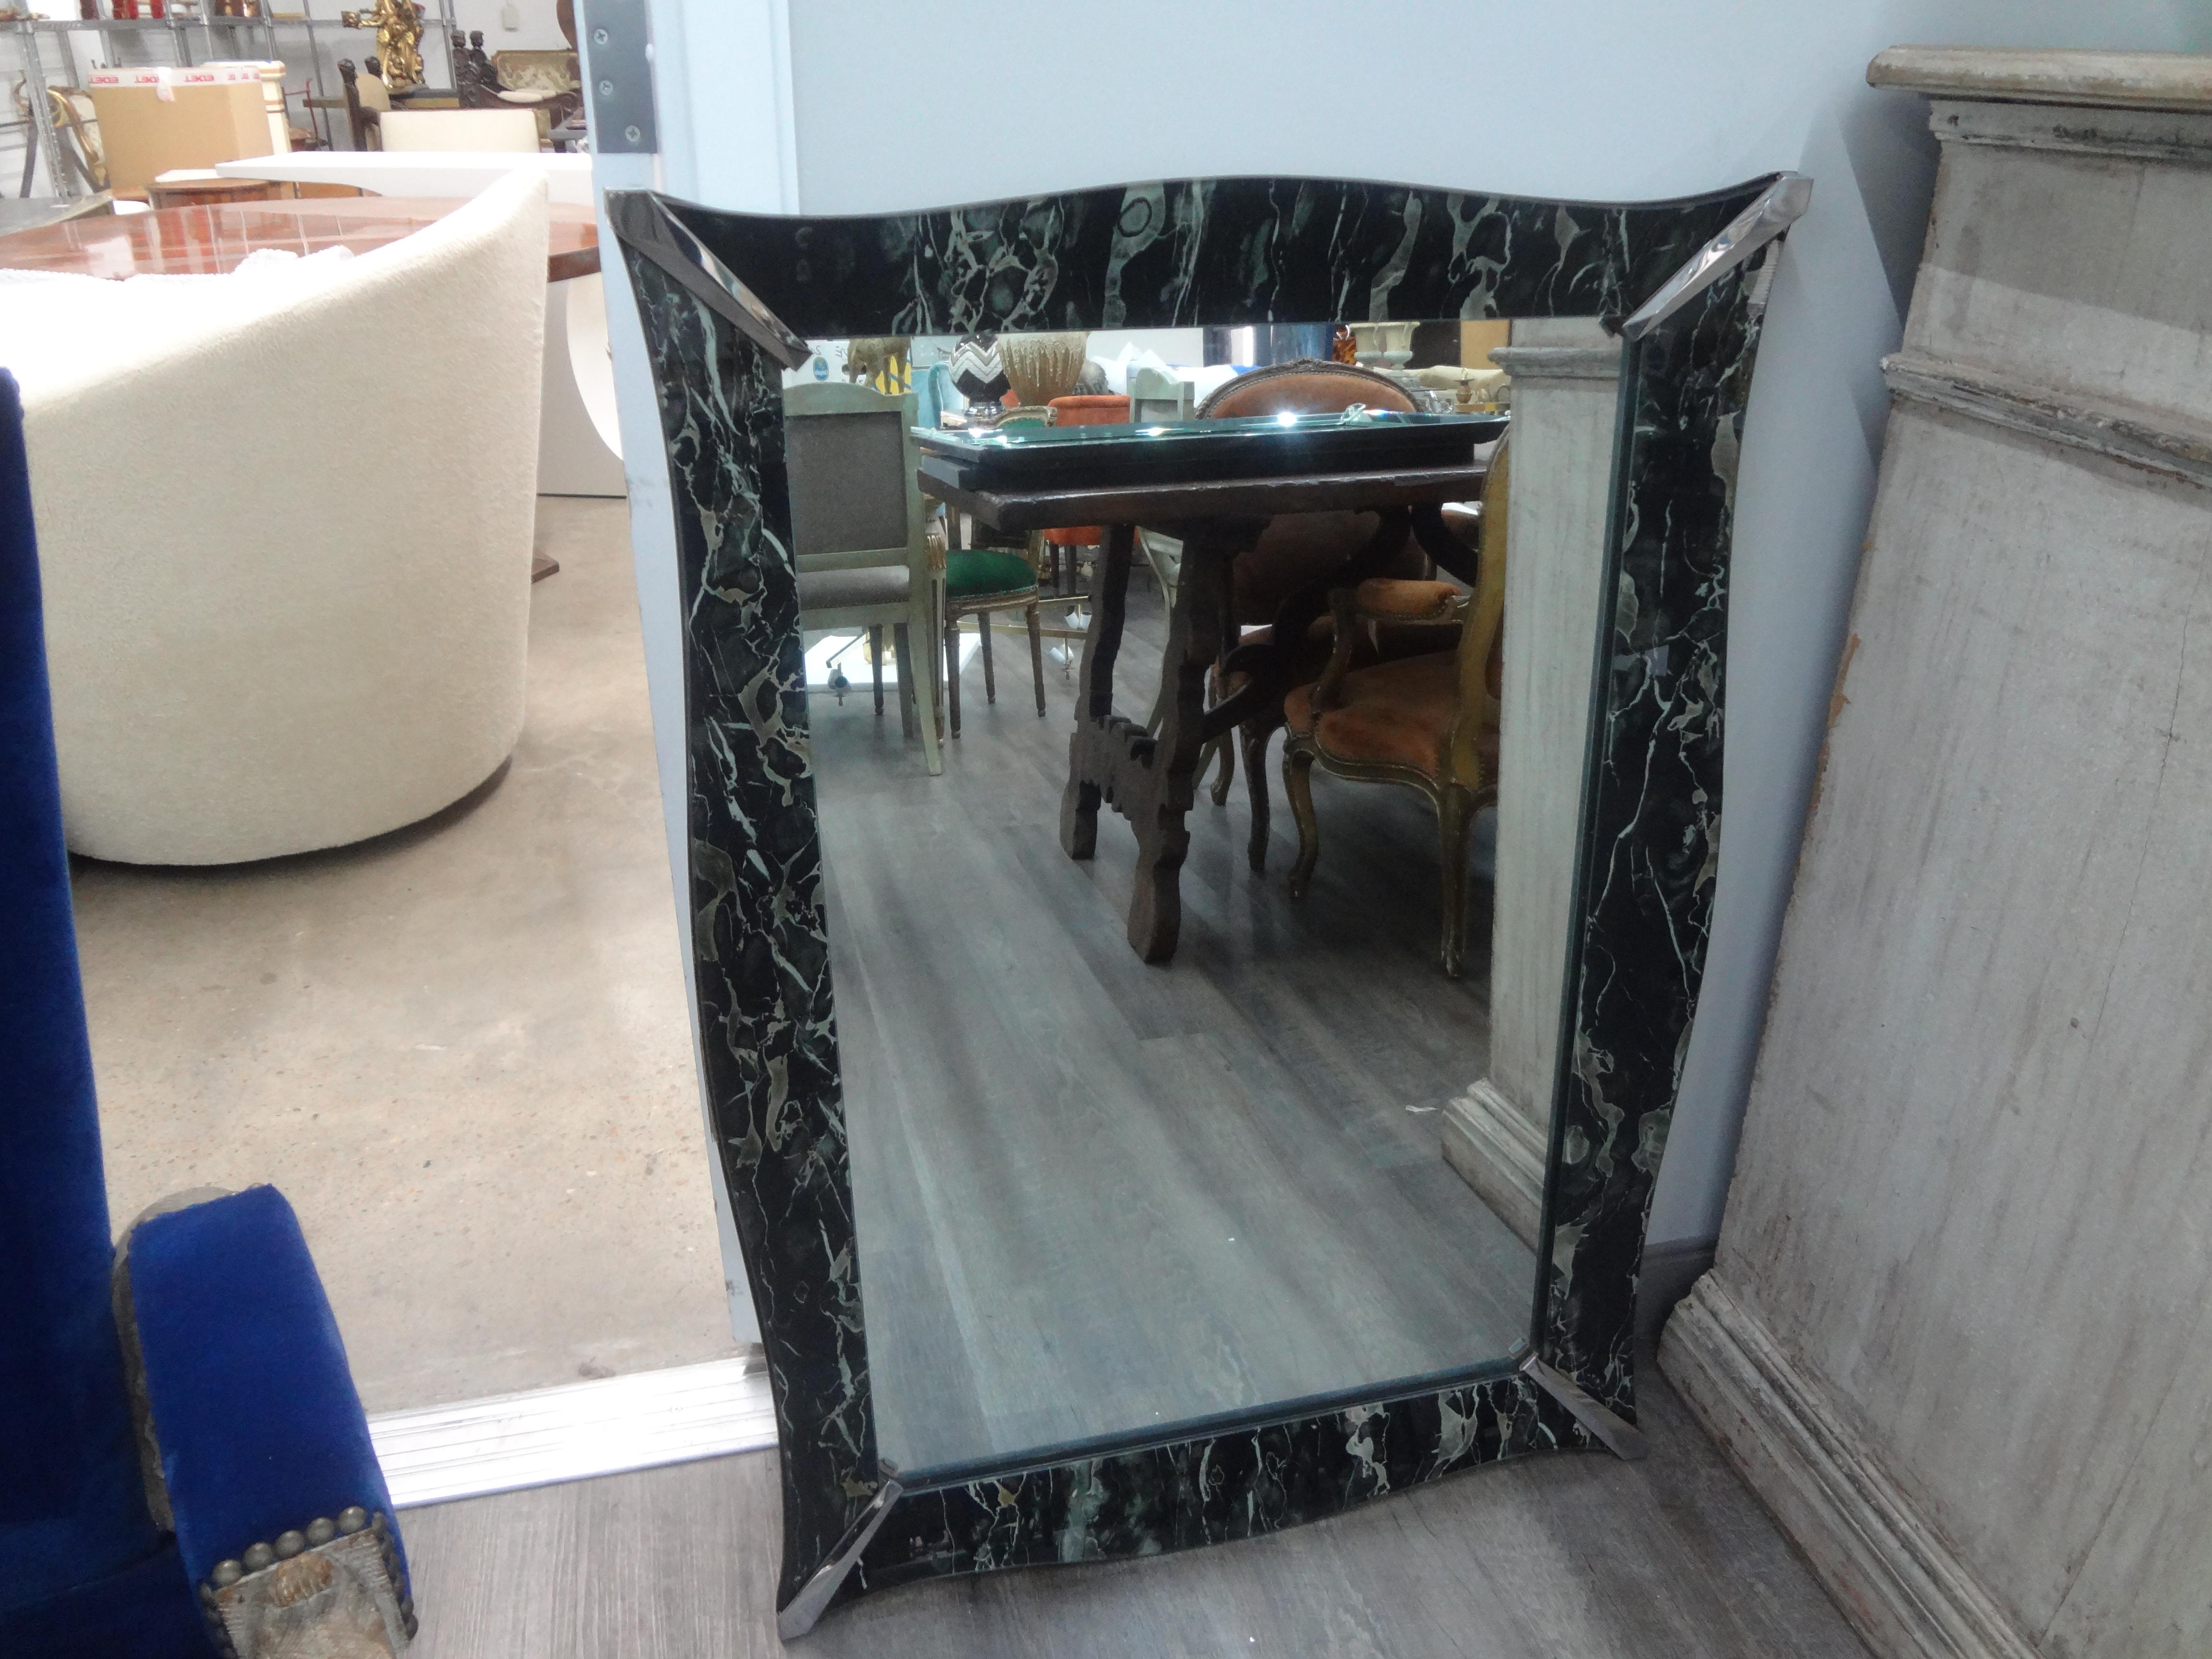 Vintage faux marble eglomise Venetian style mirror.
This unusual rectangular Venetian style mirror has a perimeter of marbleized eglomise glass with a central mirrored panel and chrome corner detail. Our lovely Hollywood Regency mirror can be